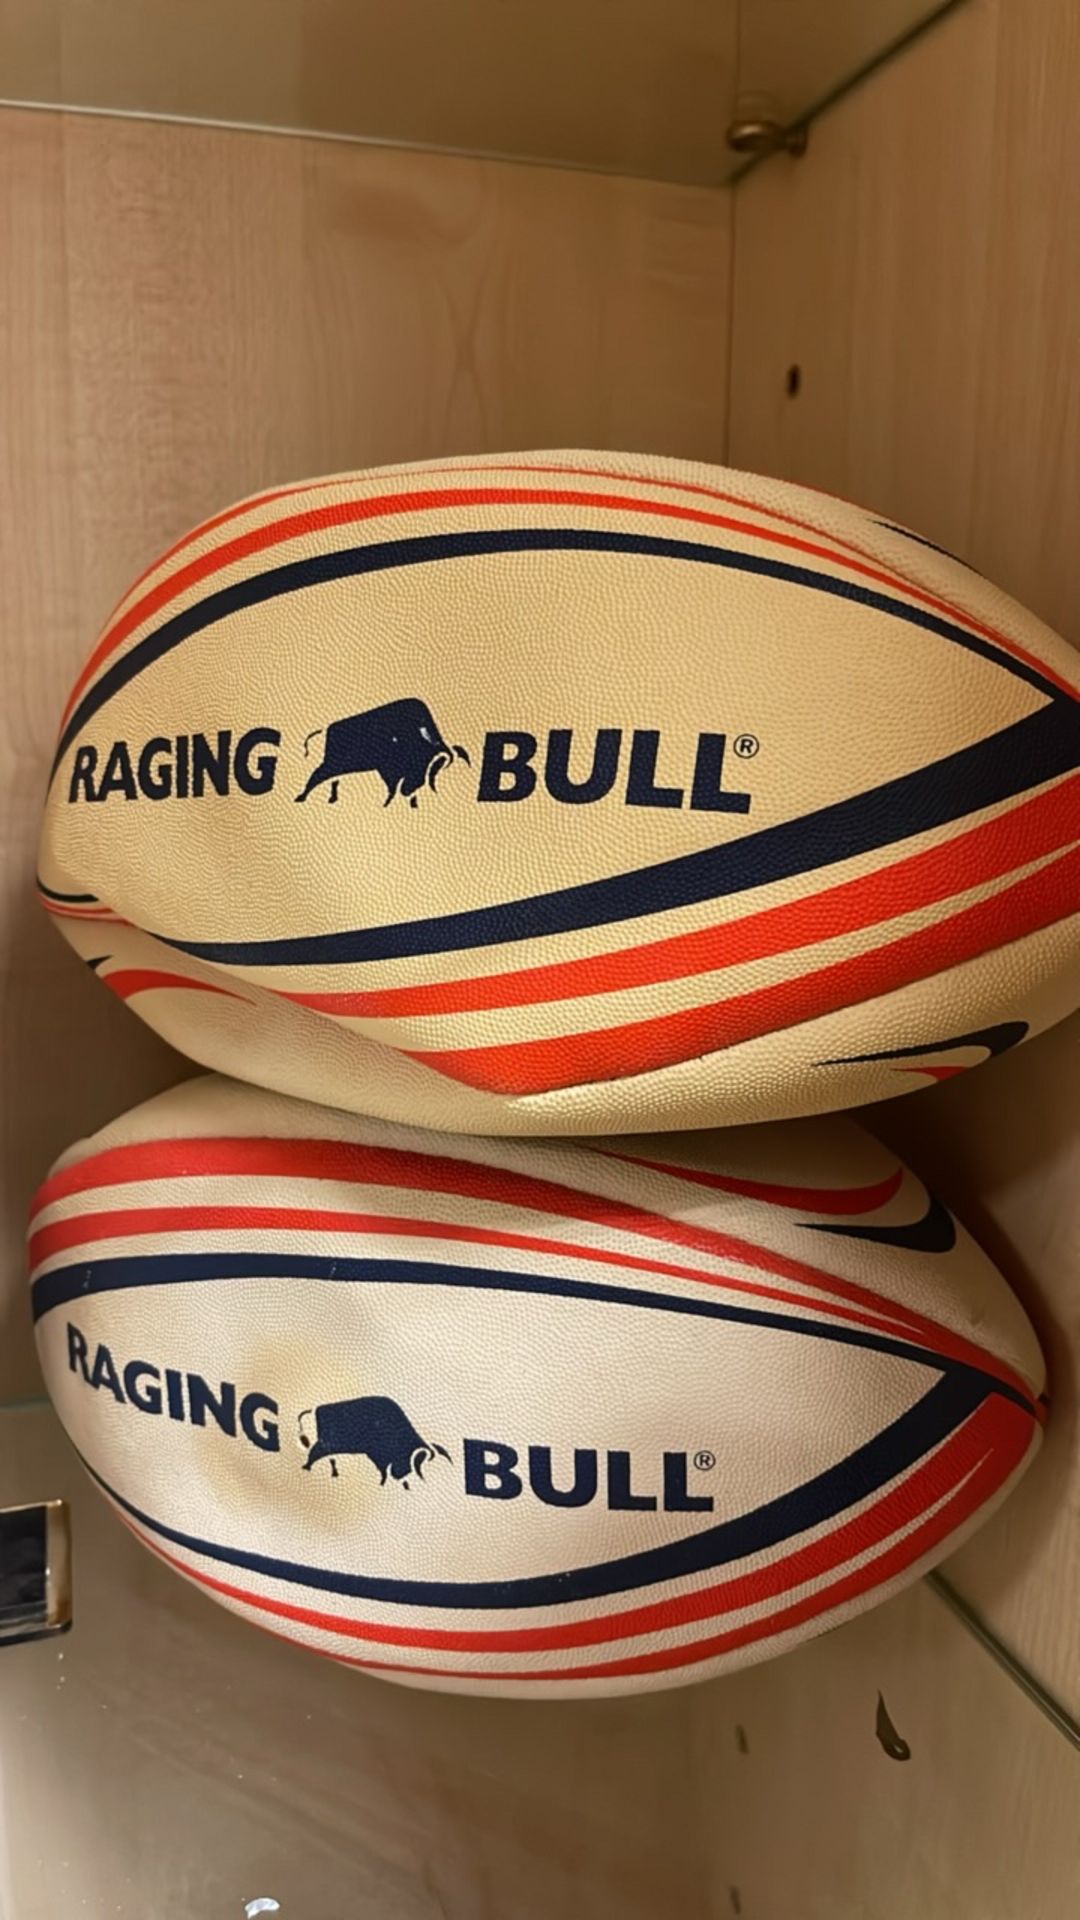 Raging Bull Rugby Balls x5 - Image 5 of 7